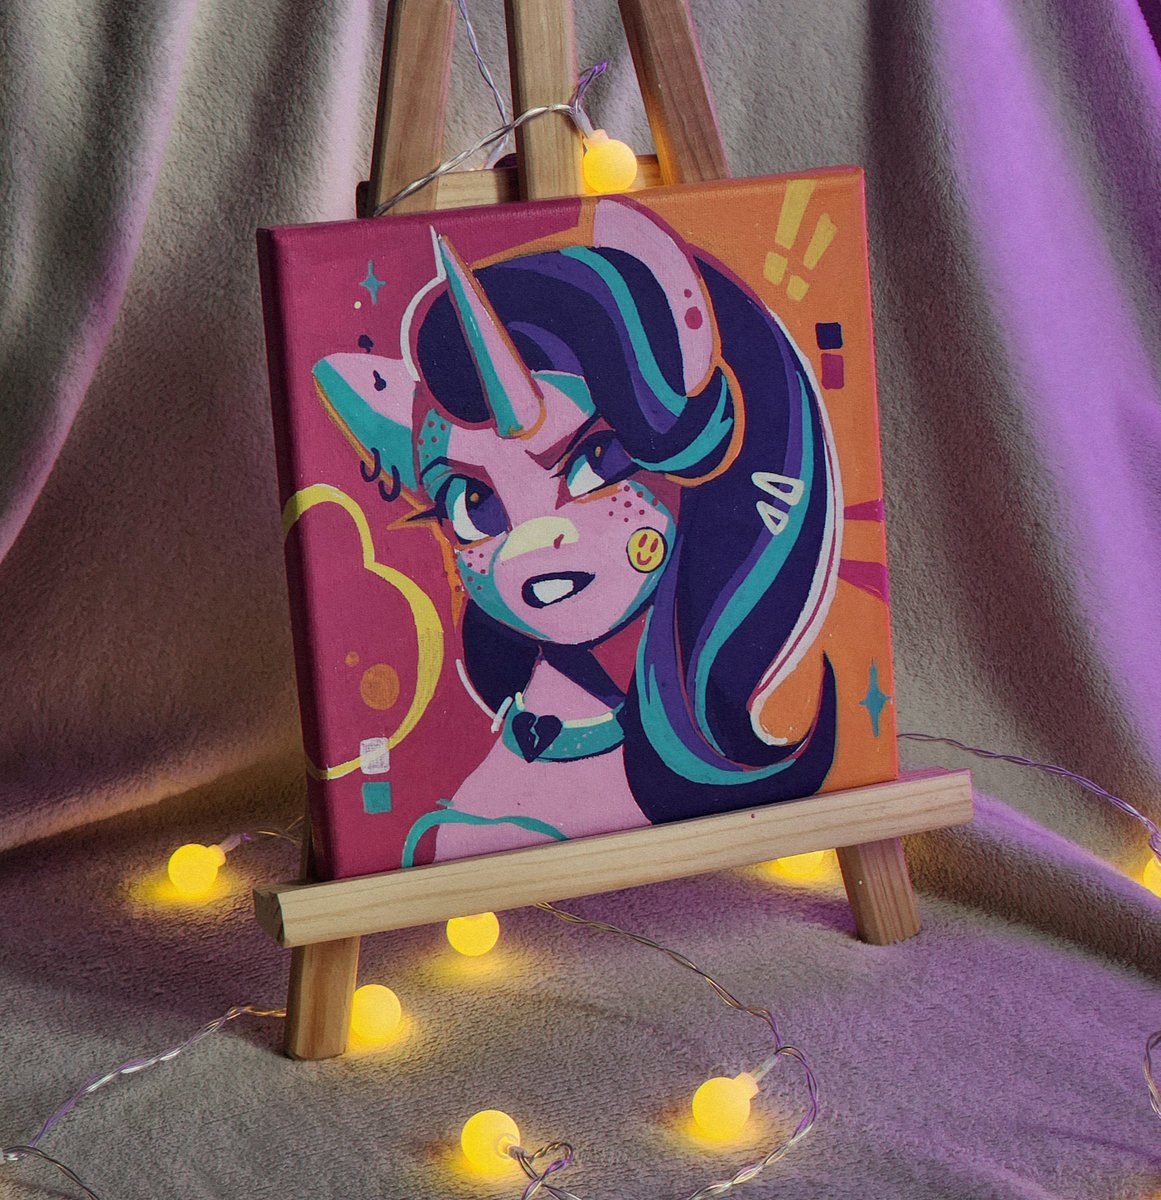 Auction for a Starlight painting! (Traditional art)
3 days

Starting bid: $20
Minimum bid increase: $1
No autobuy

Description: canvas on a stretcher 20x20 cm, acrylic markers